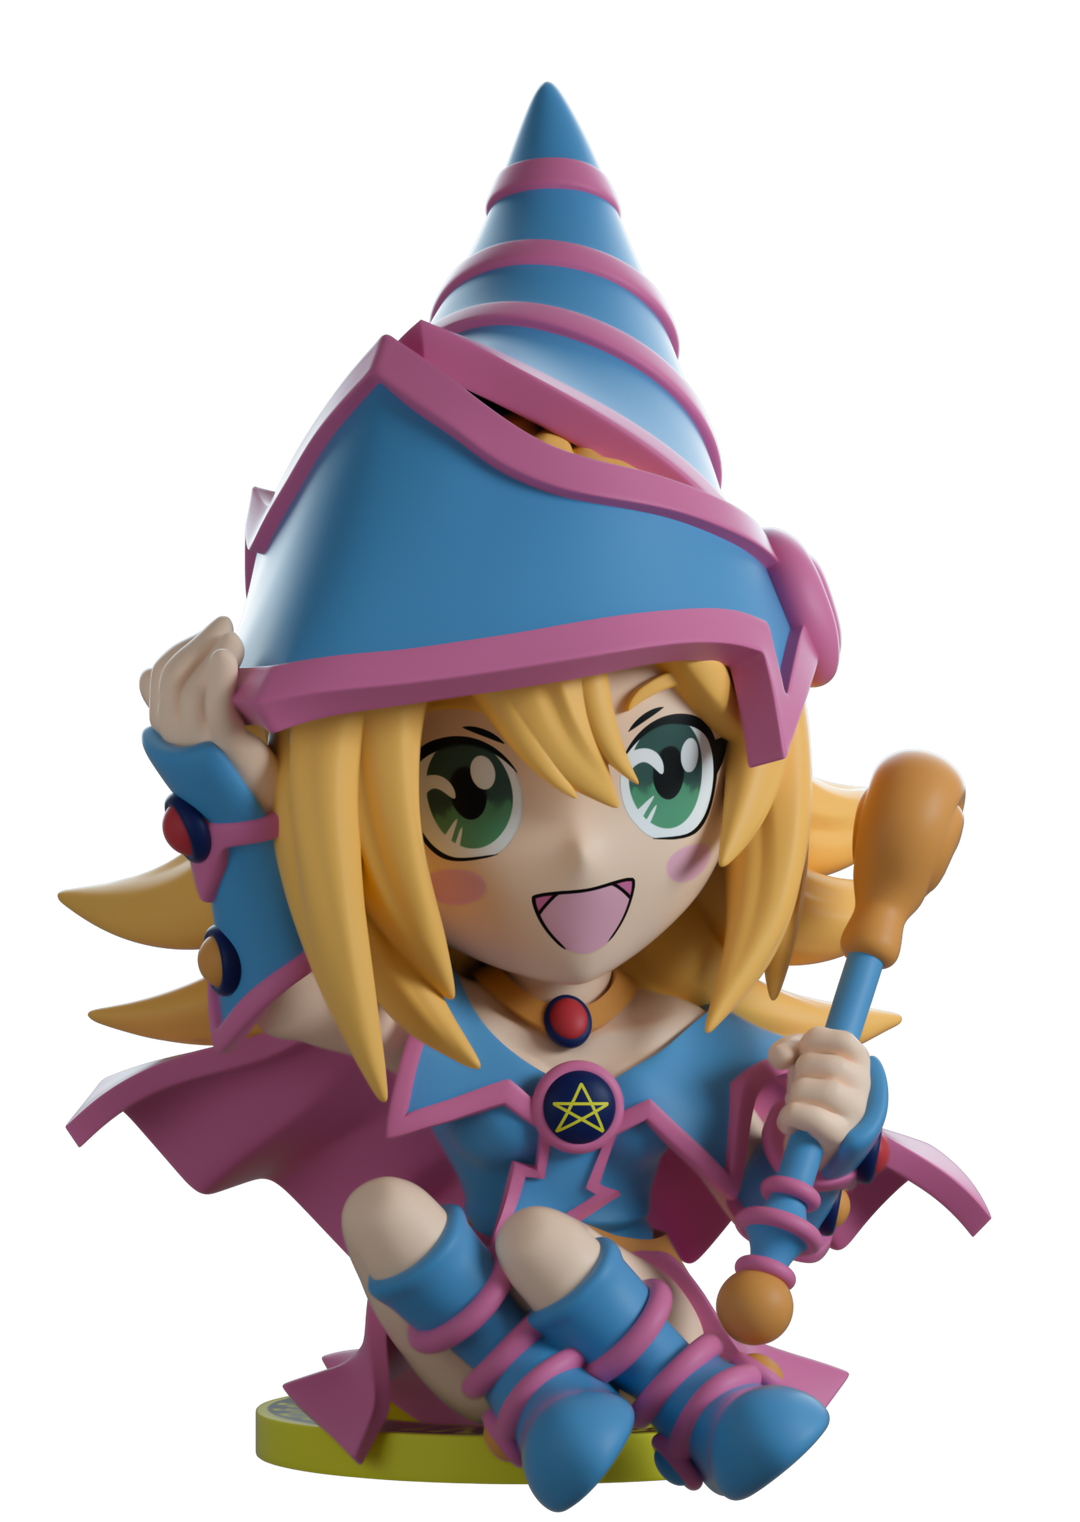 Youtooz : Yu-Gi-Oh Collection - Dark Magician Girl #3 vRare LACC Convention Exclusive